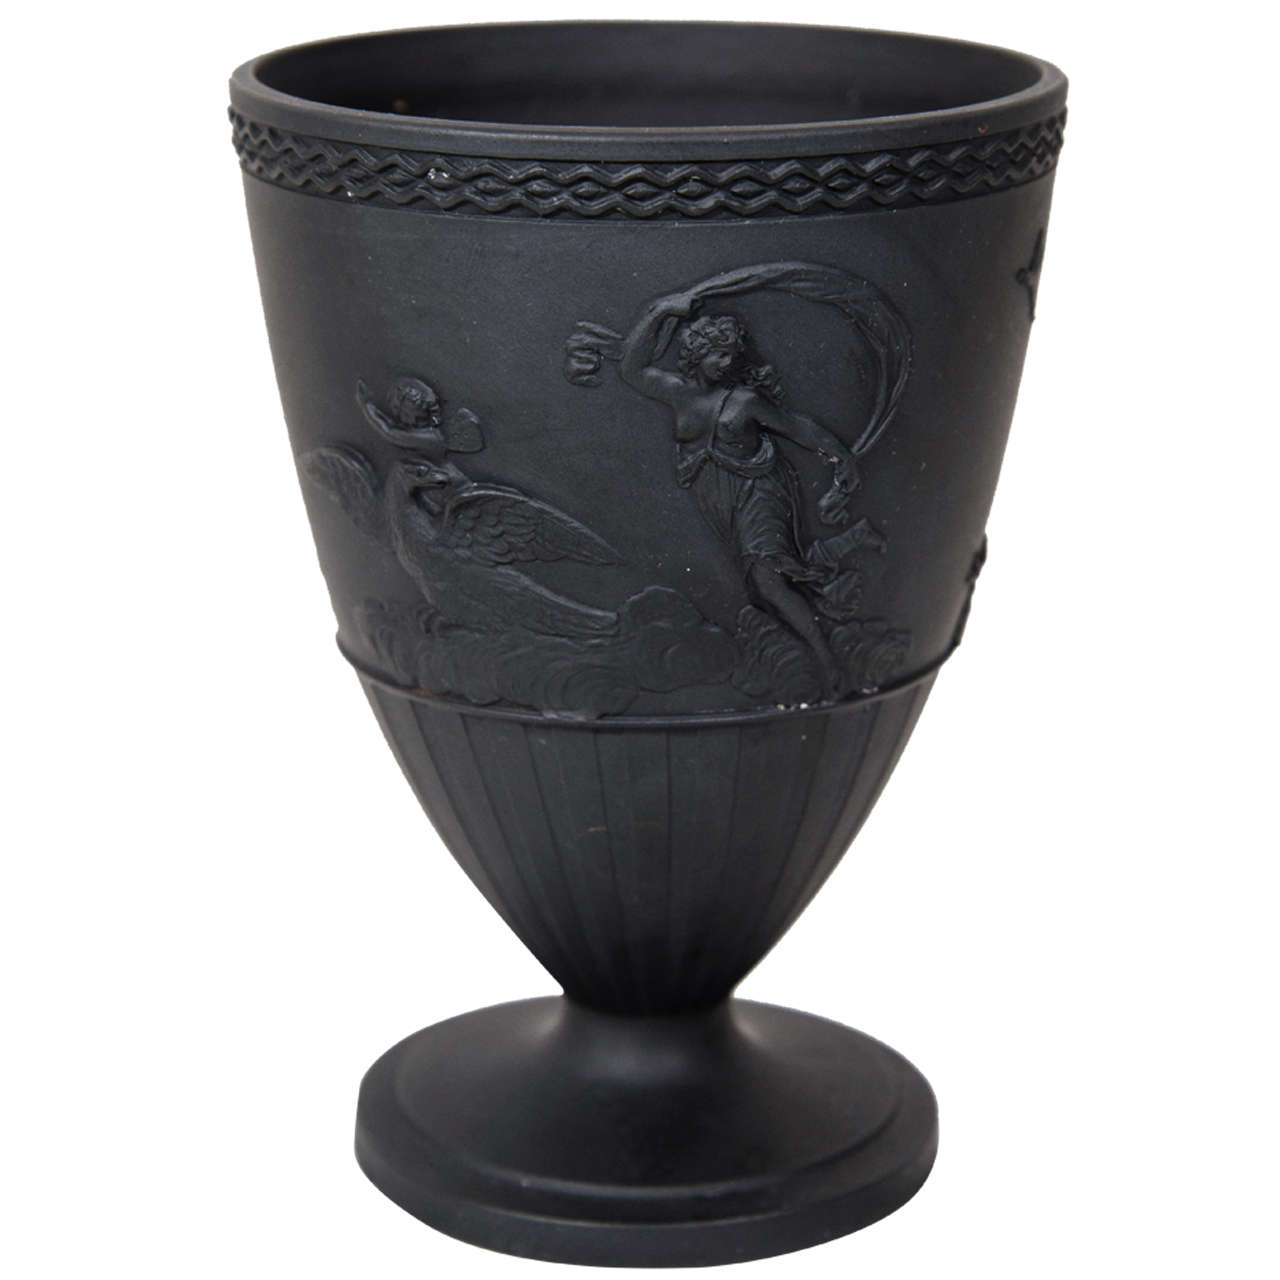 An 18th Century Black Basalt Footed Cup